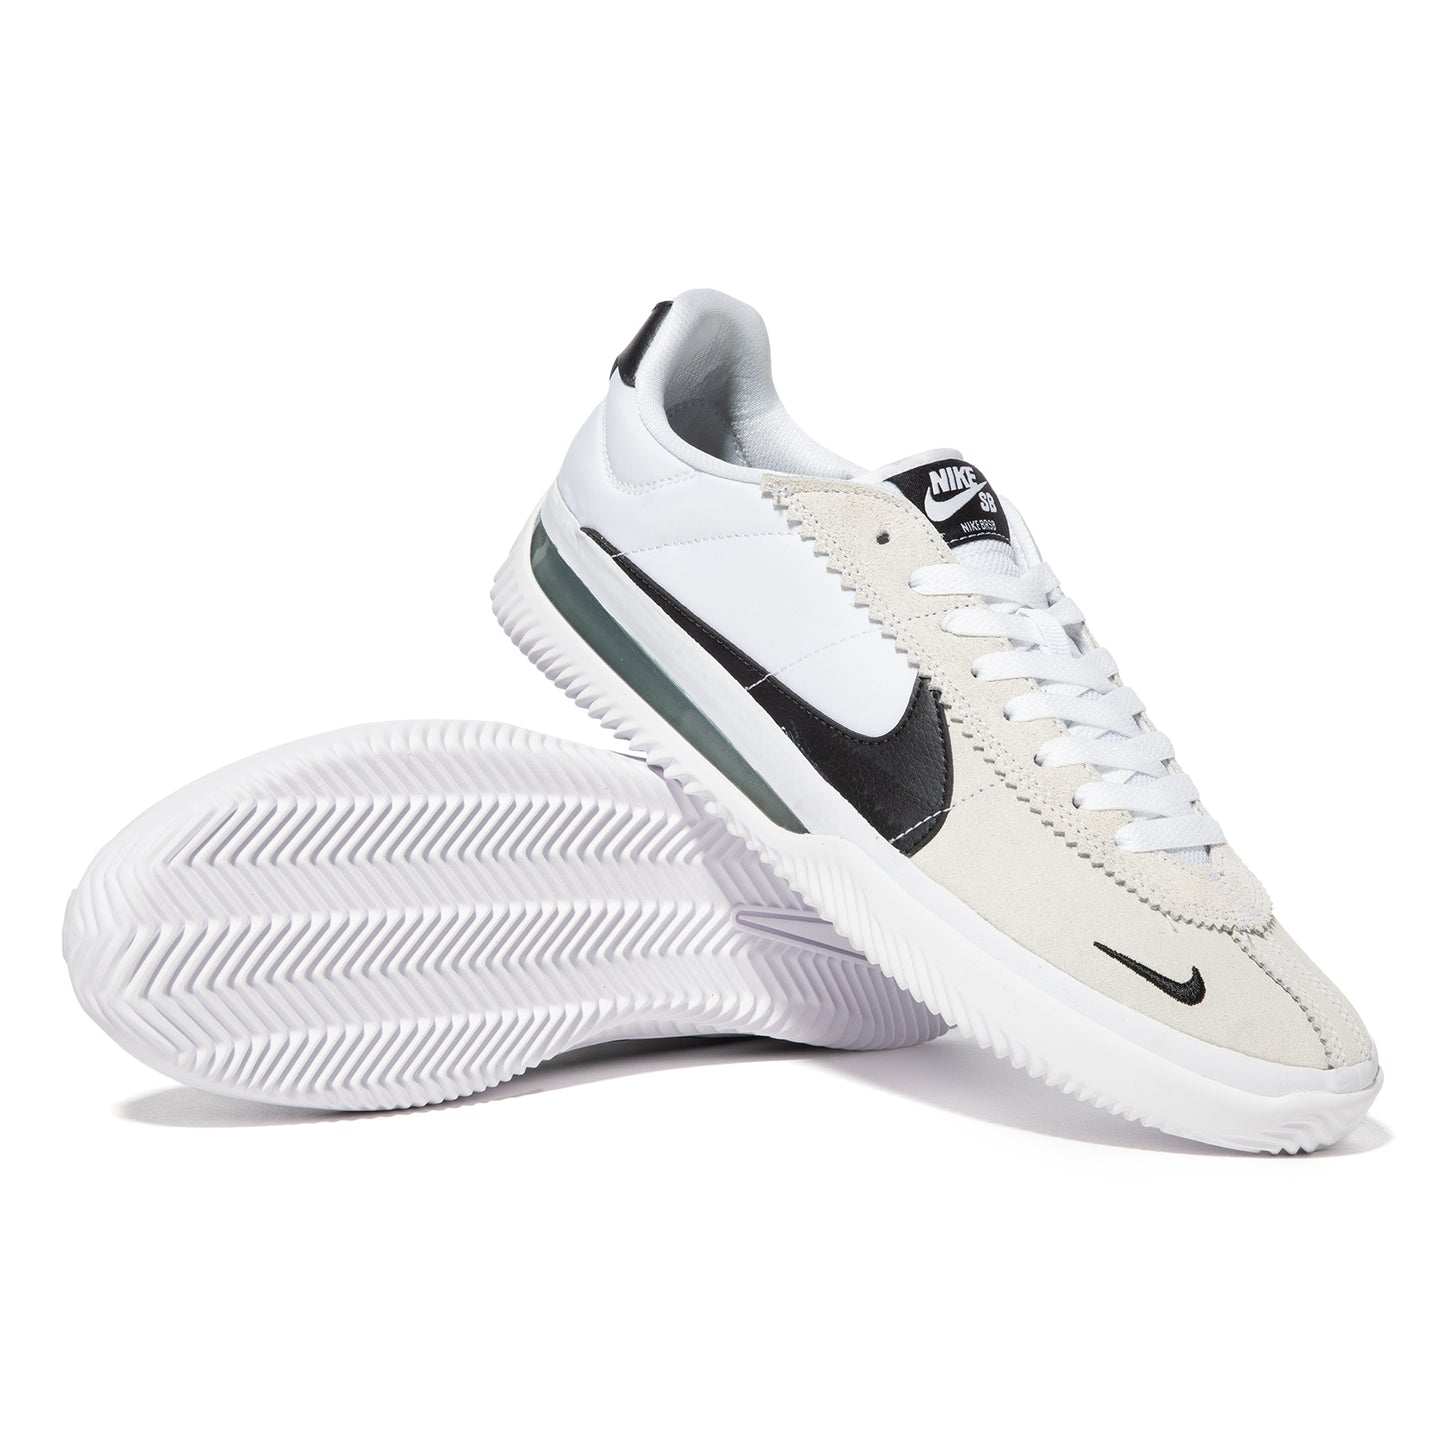 Nike BRSB Skate Sneakers (White/Black) – Concepts